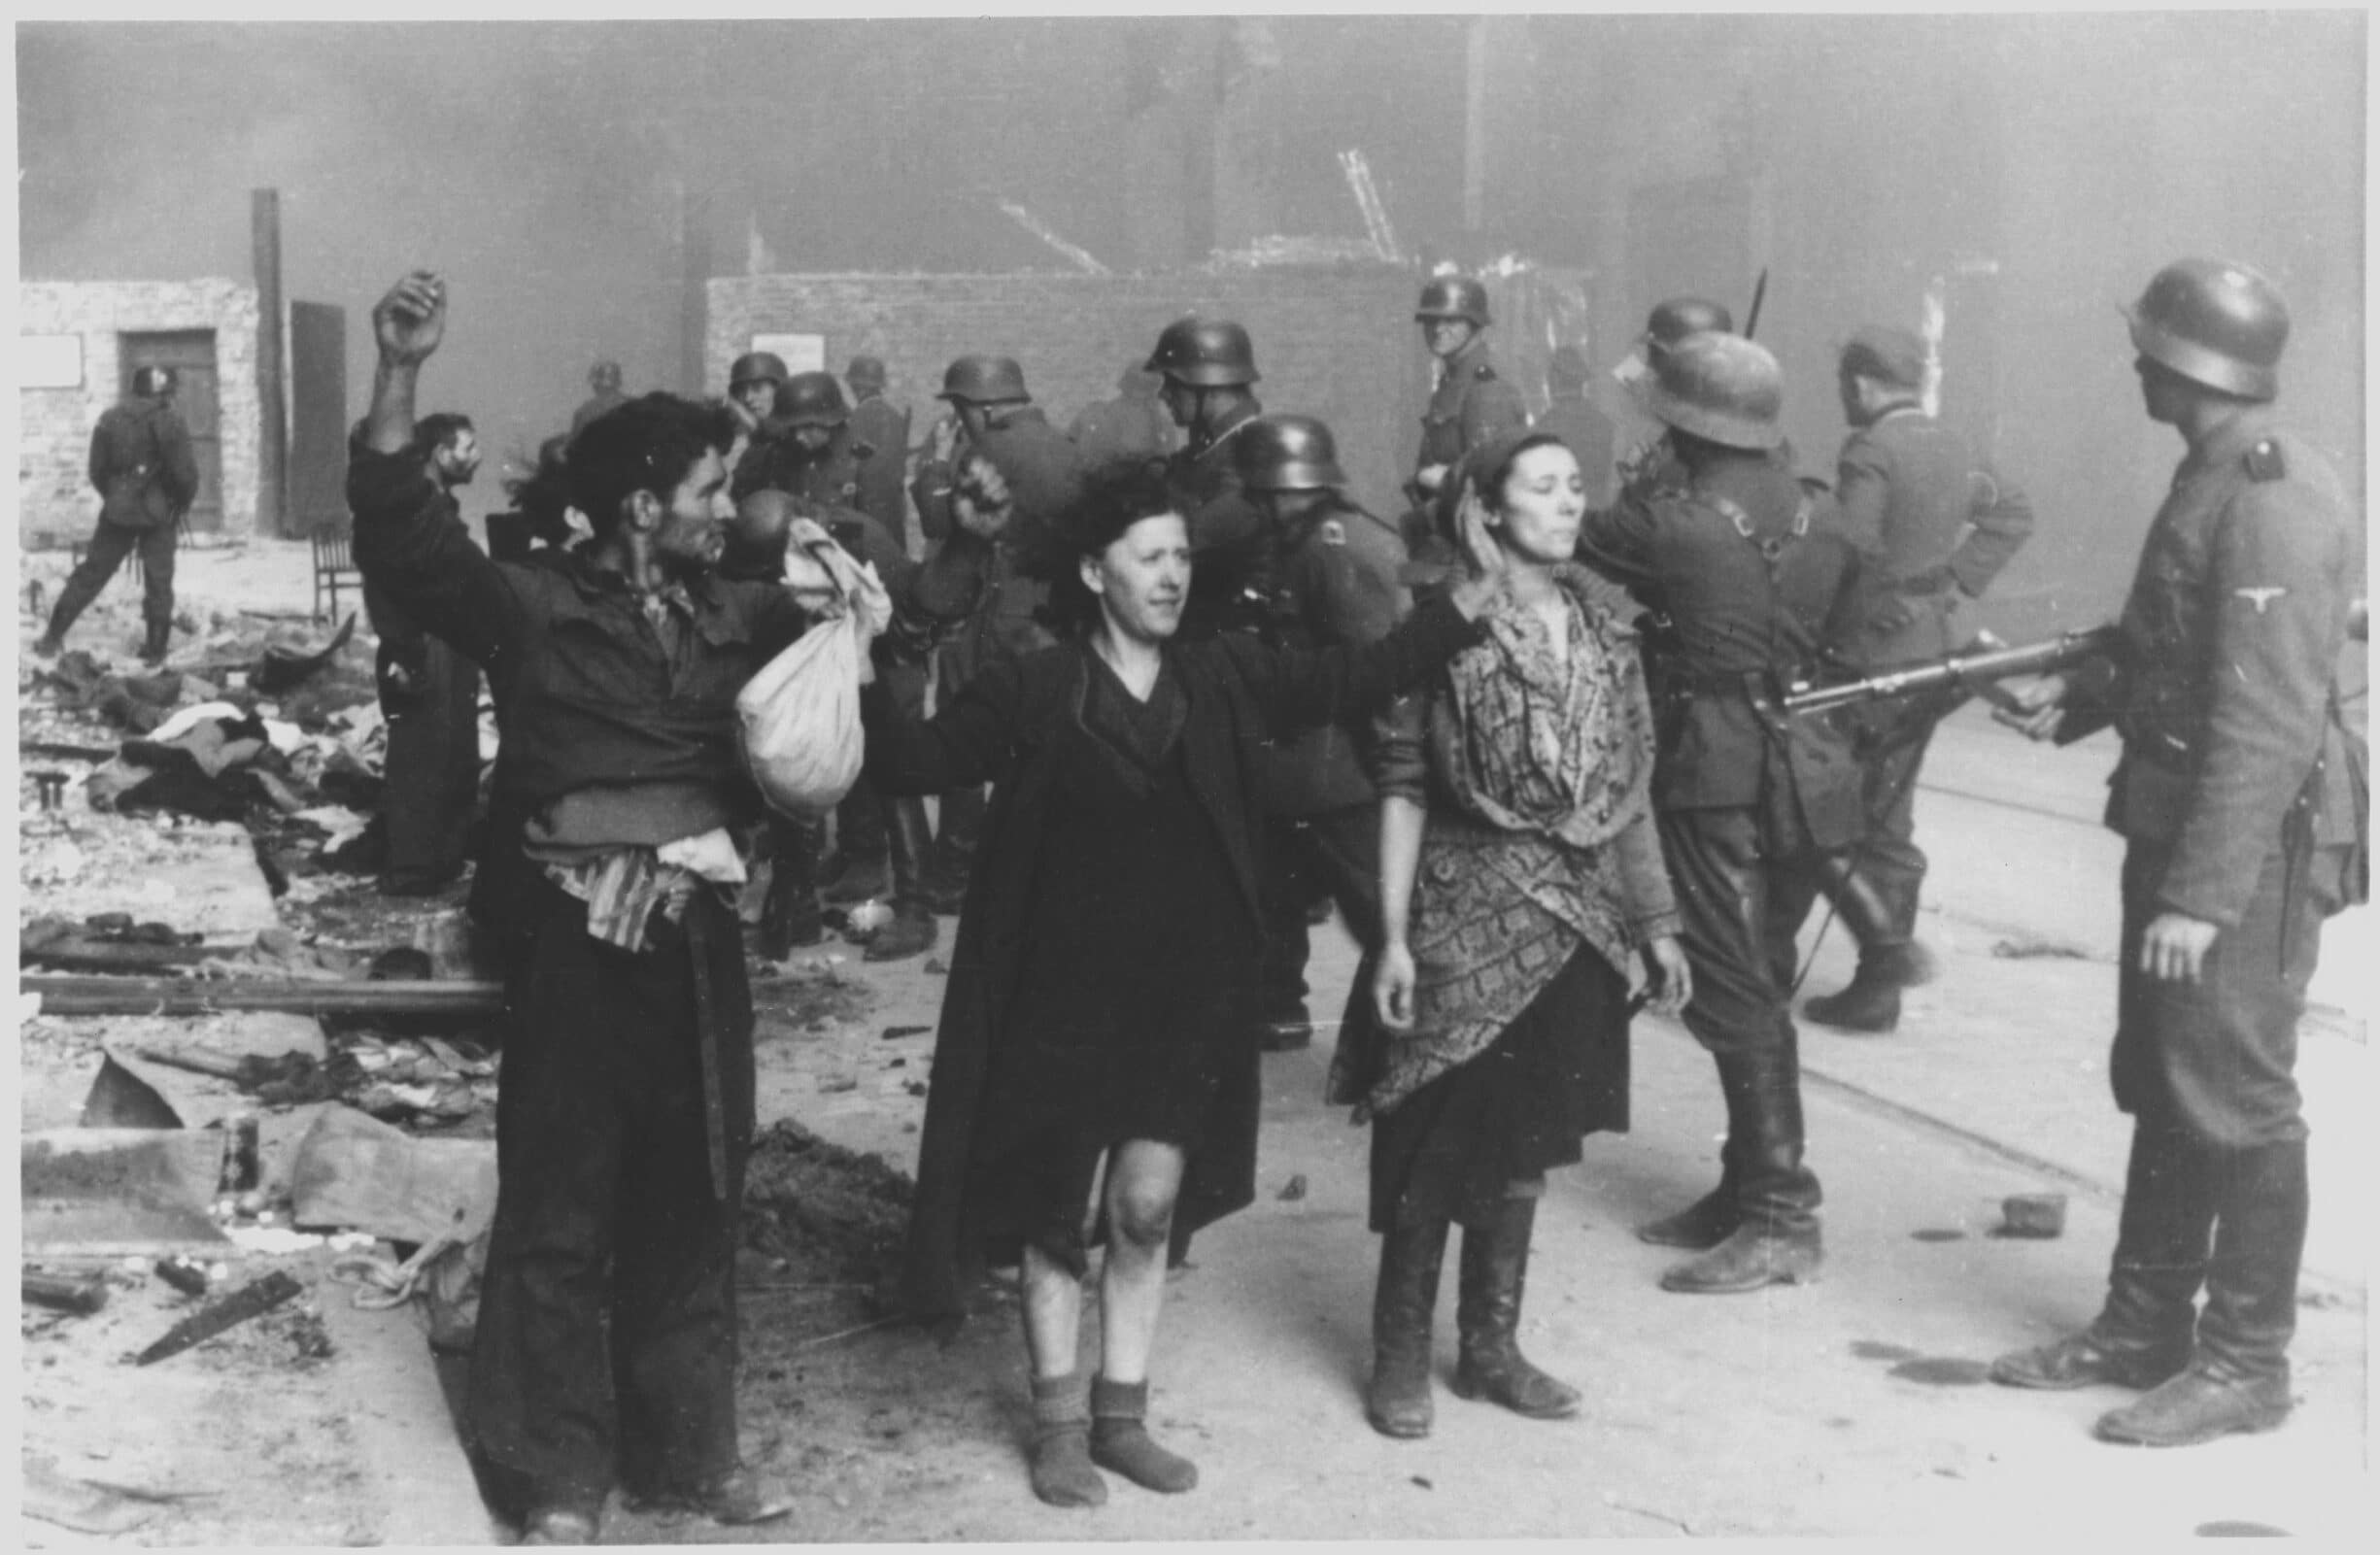 The original caption of the Nazi: "These bandits offered armed resistance". Picture taken at Nowolipie street looking East, near intersection with Smocza street. In the back one can see ghetto wall with a gate, between 19 April 1943 and 16 May 1943. Photo: Unknown author (Franz Konrad confessed to taking some of the photographs, the rest was probably taken by photographers from Propaganda Kompanie nr 689. Collection: Bildarchiv Preussischer Kulturbesitz (BPK). Public Domain.